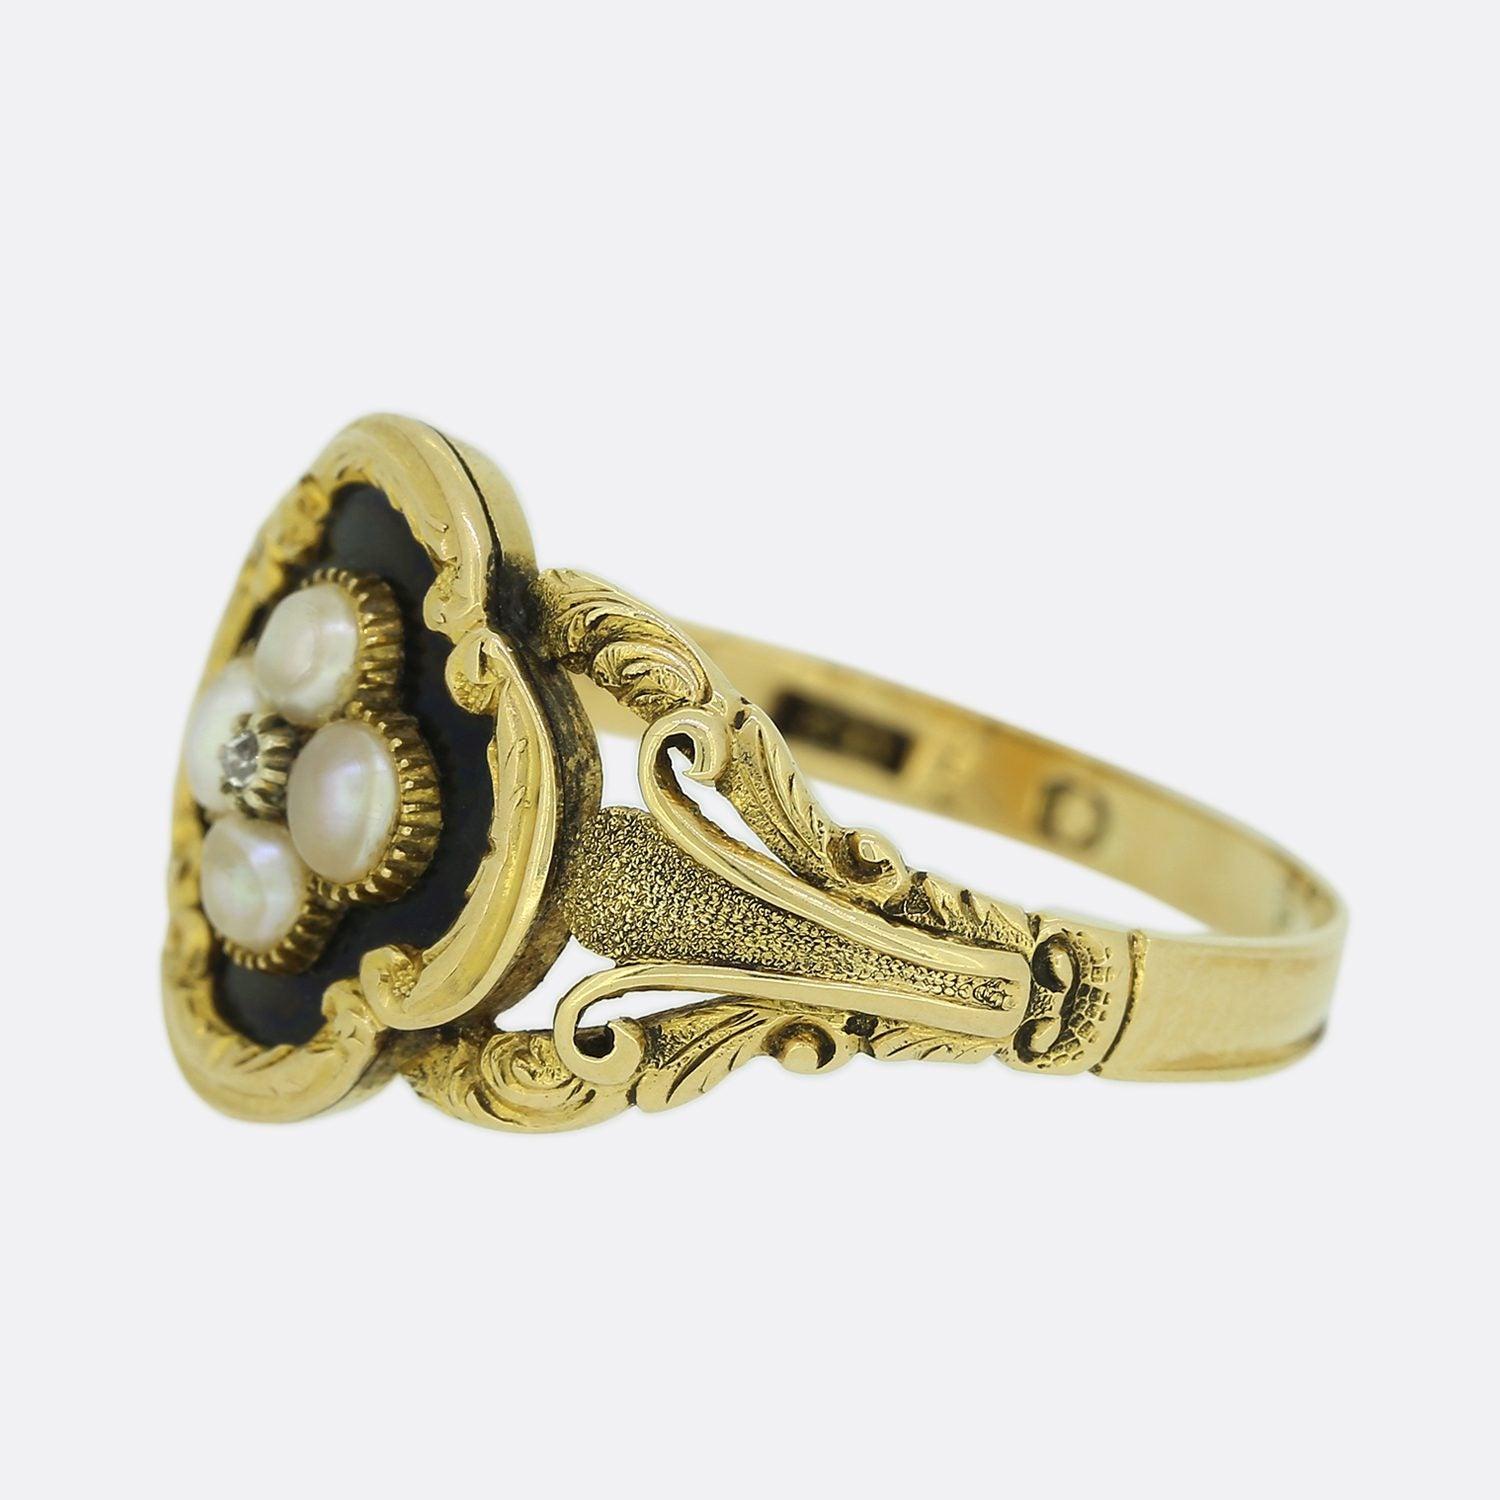 This is a wonderfully hand made yellow gold Victorian mourning ring. The ring is set with a central rose cut diamond in a cut collet setting and is surrounded by four original natural pearls in a quatrefoil shaped face. The inside of the ring is